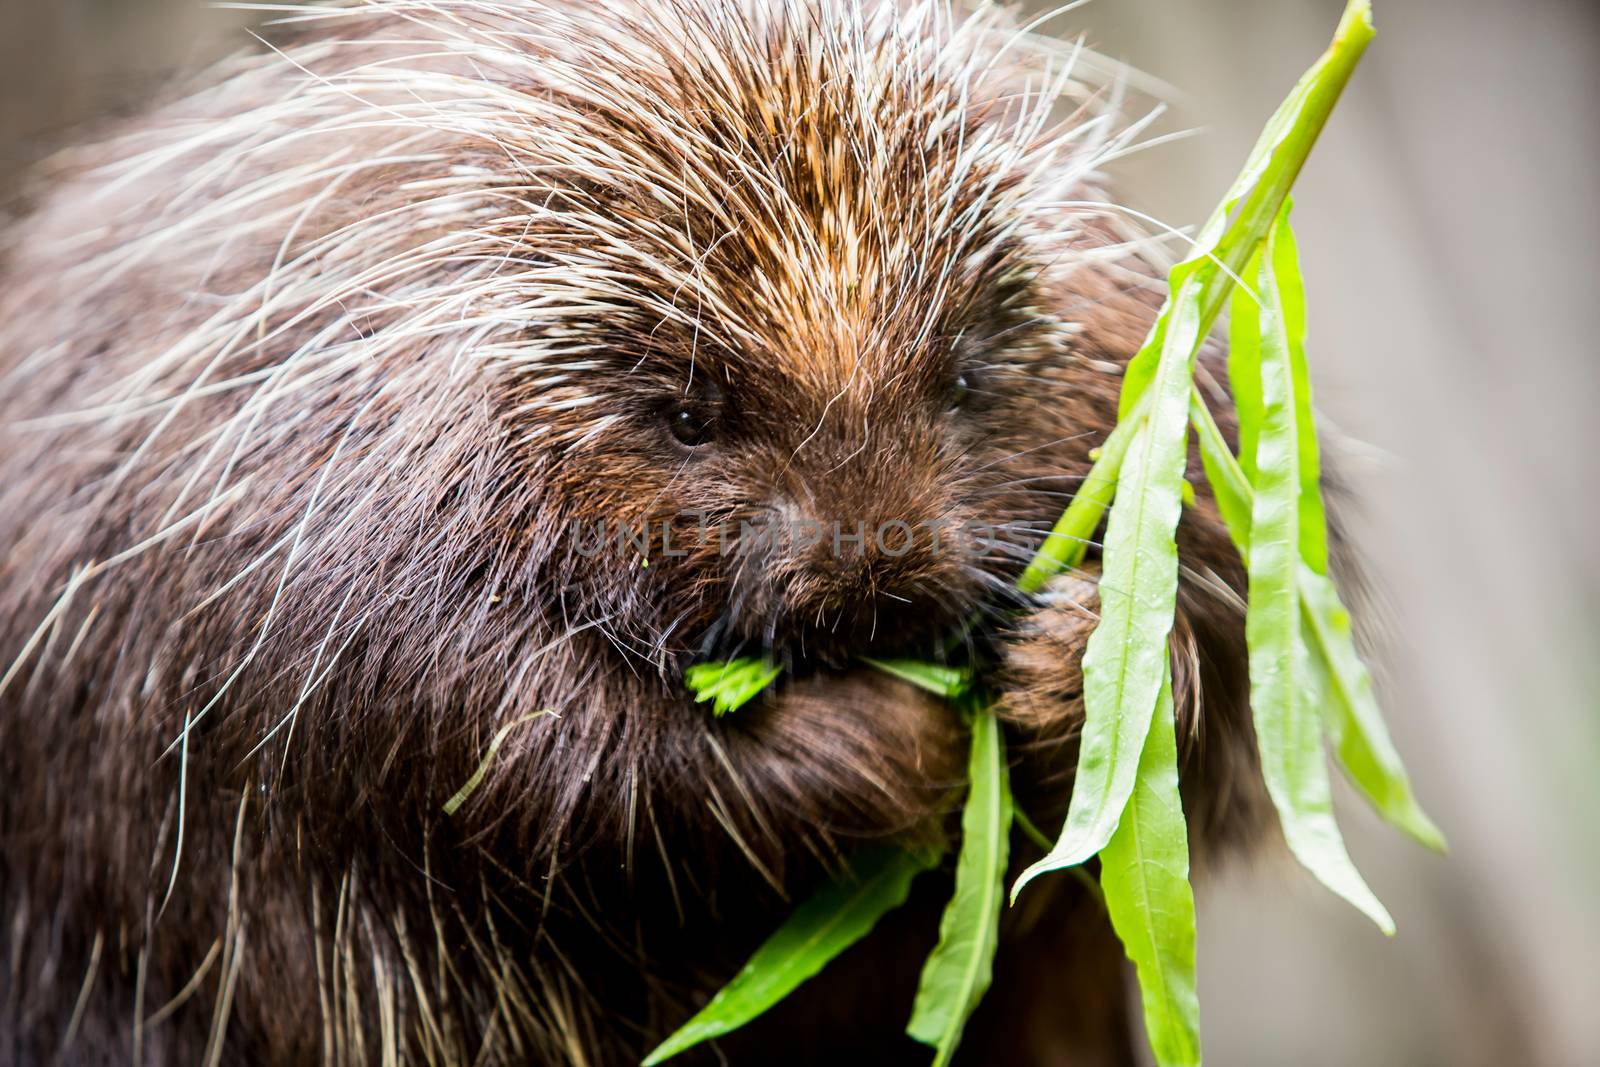 Single hungry new world porcupine eating a stalk of green leaves